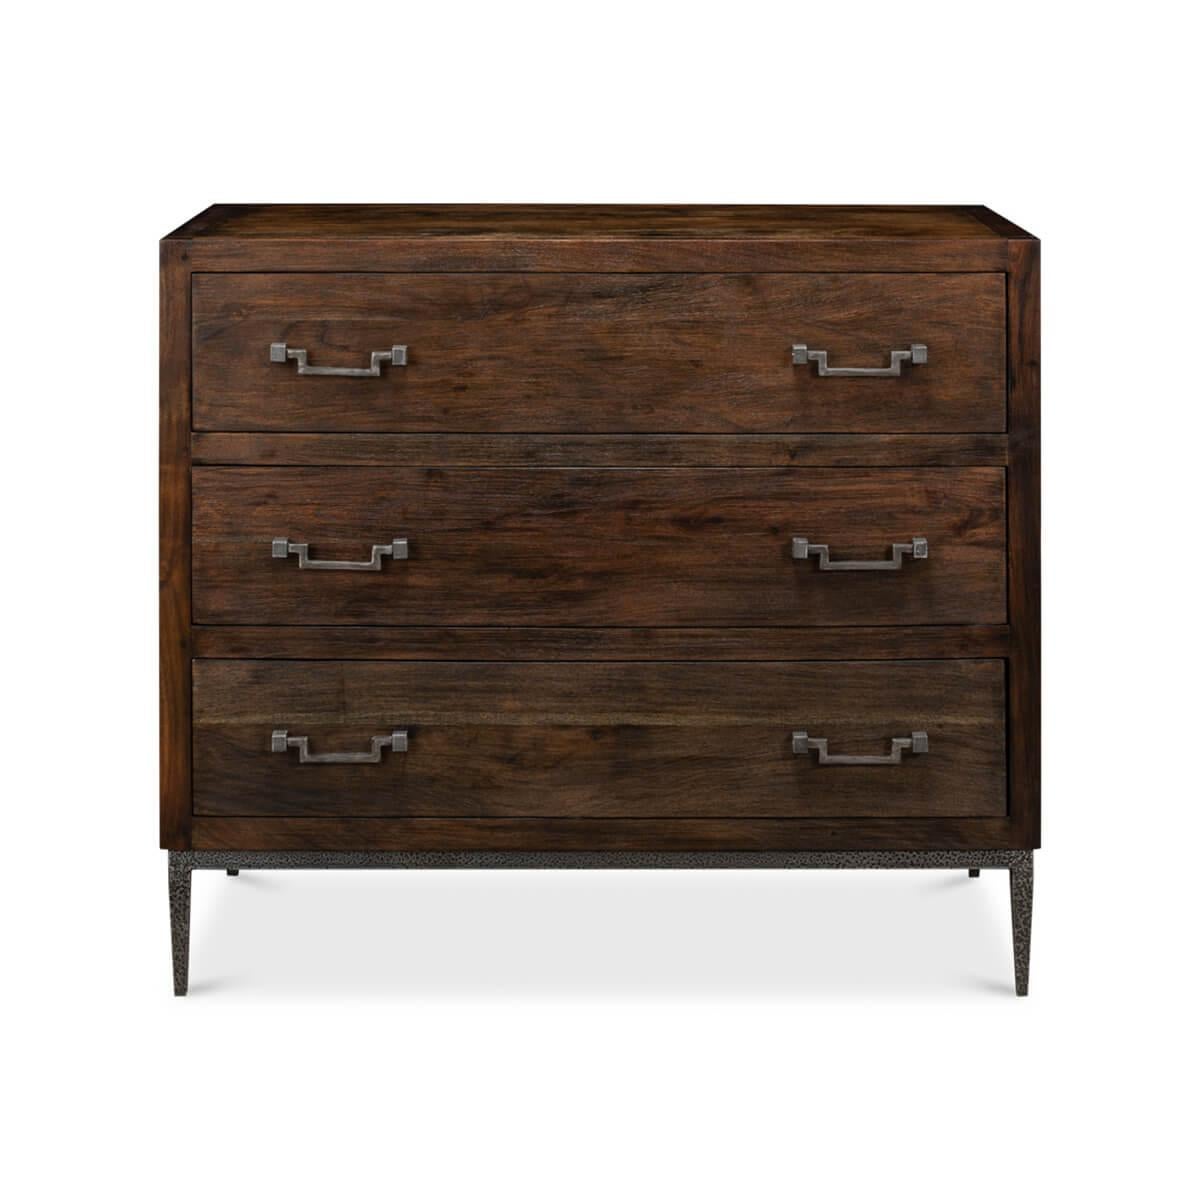 This robust chest is expertly crafted from mango wood, known for its durability and rich grain texture, presented in a delightful grey finish that complements its warm wooden tones.

Featuring three spacious drawers, this chest provides ample